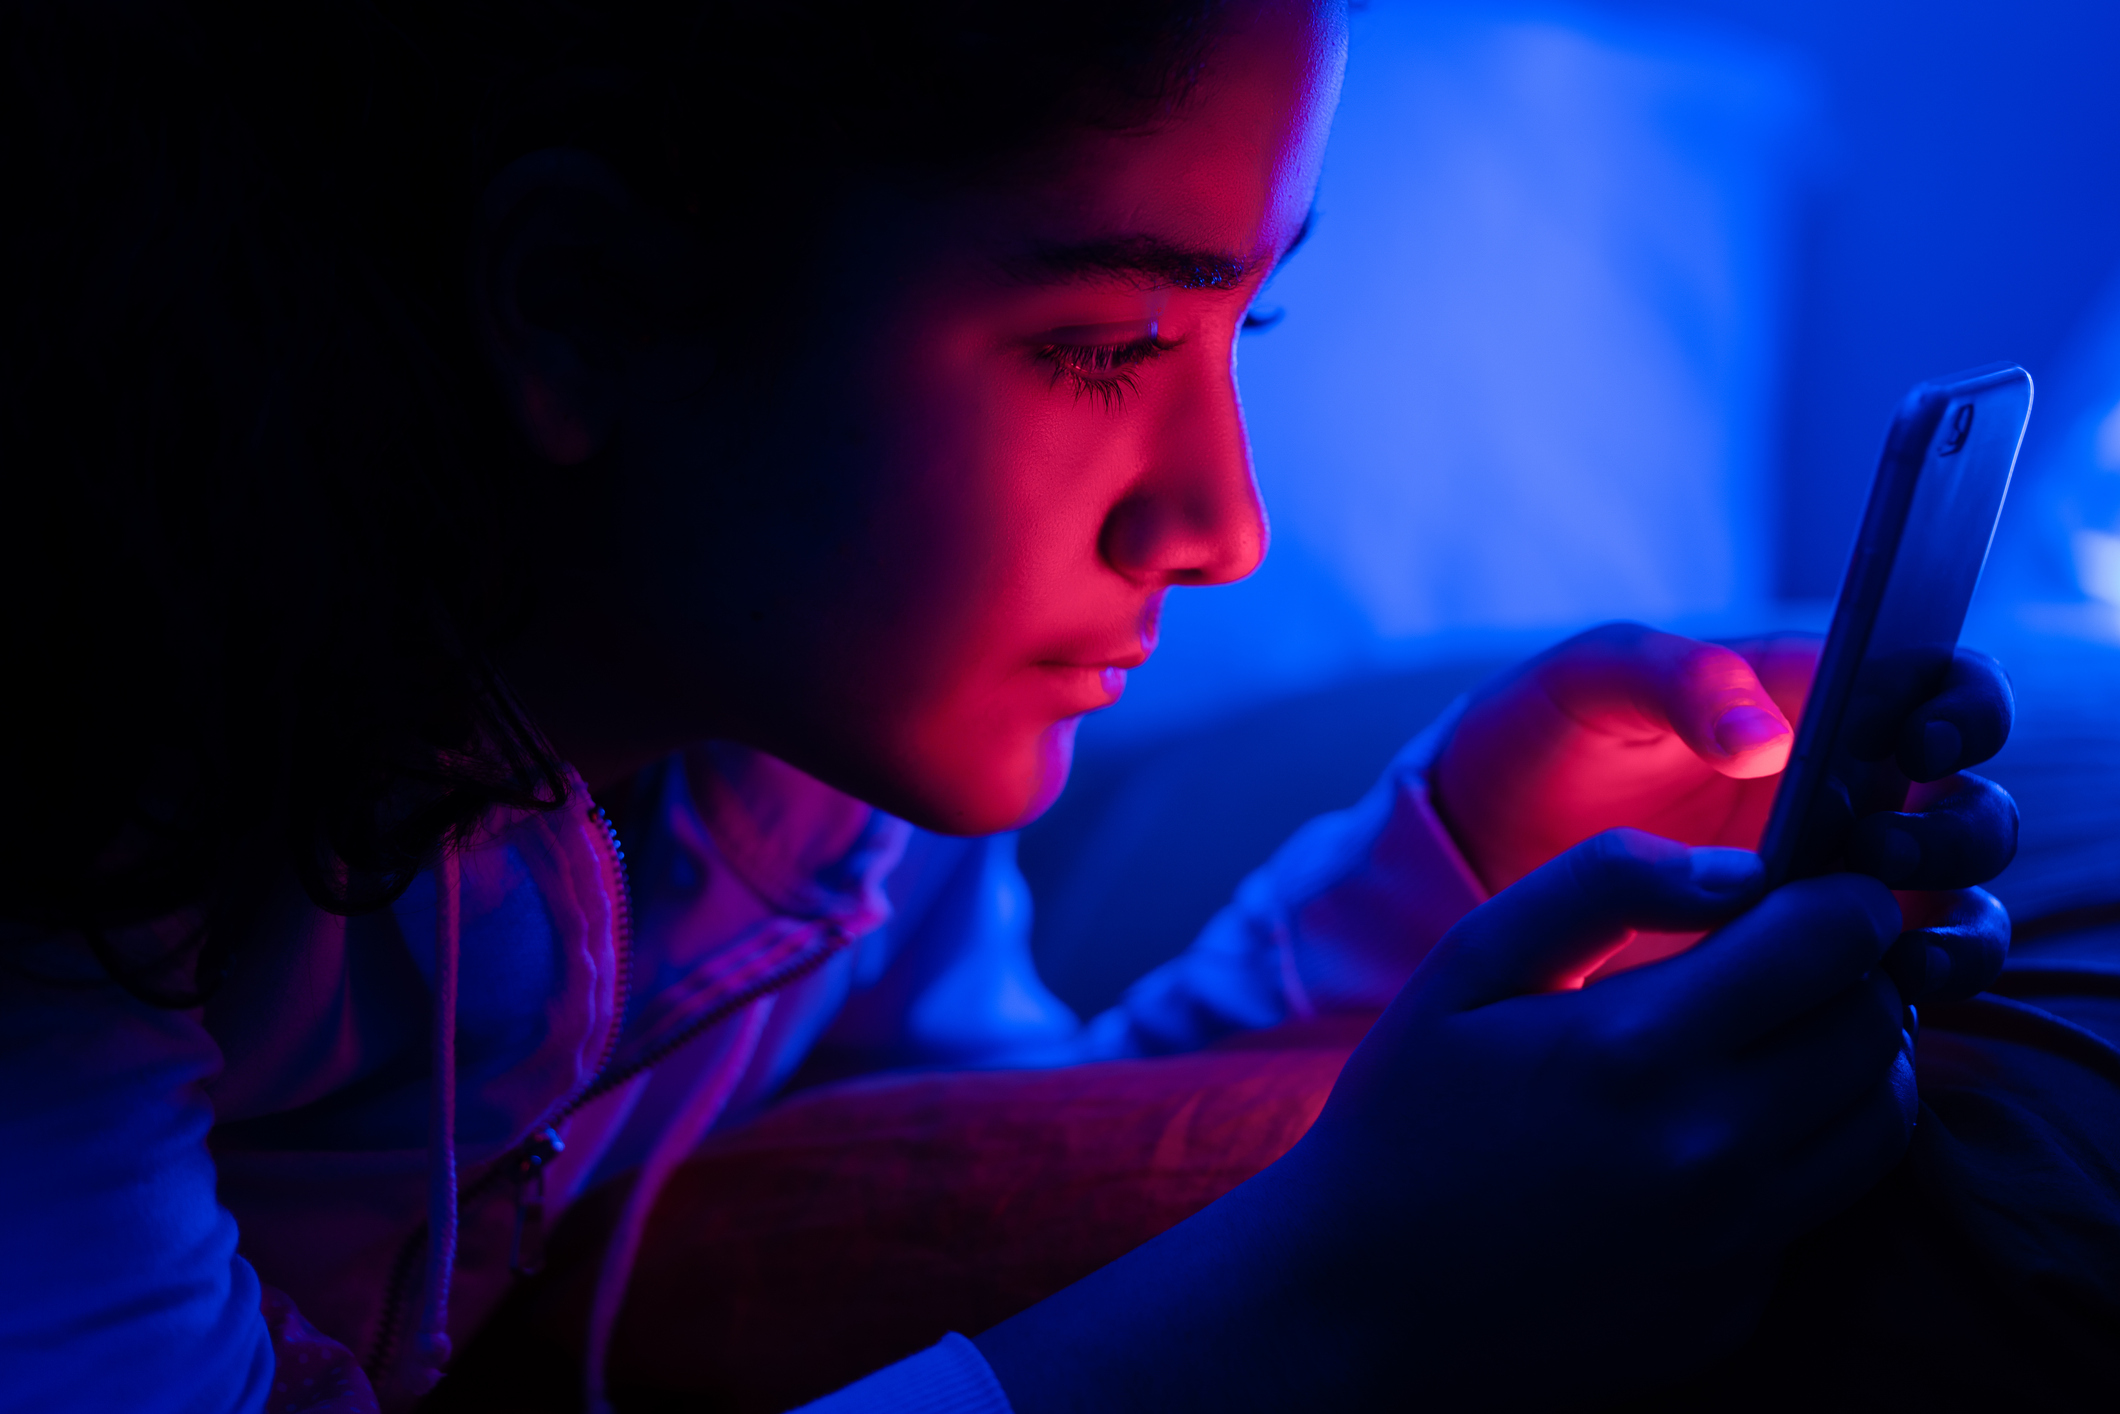 Young girl using smartphone at night